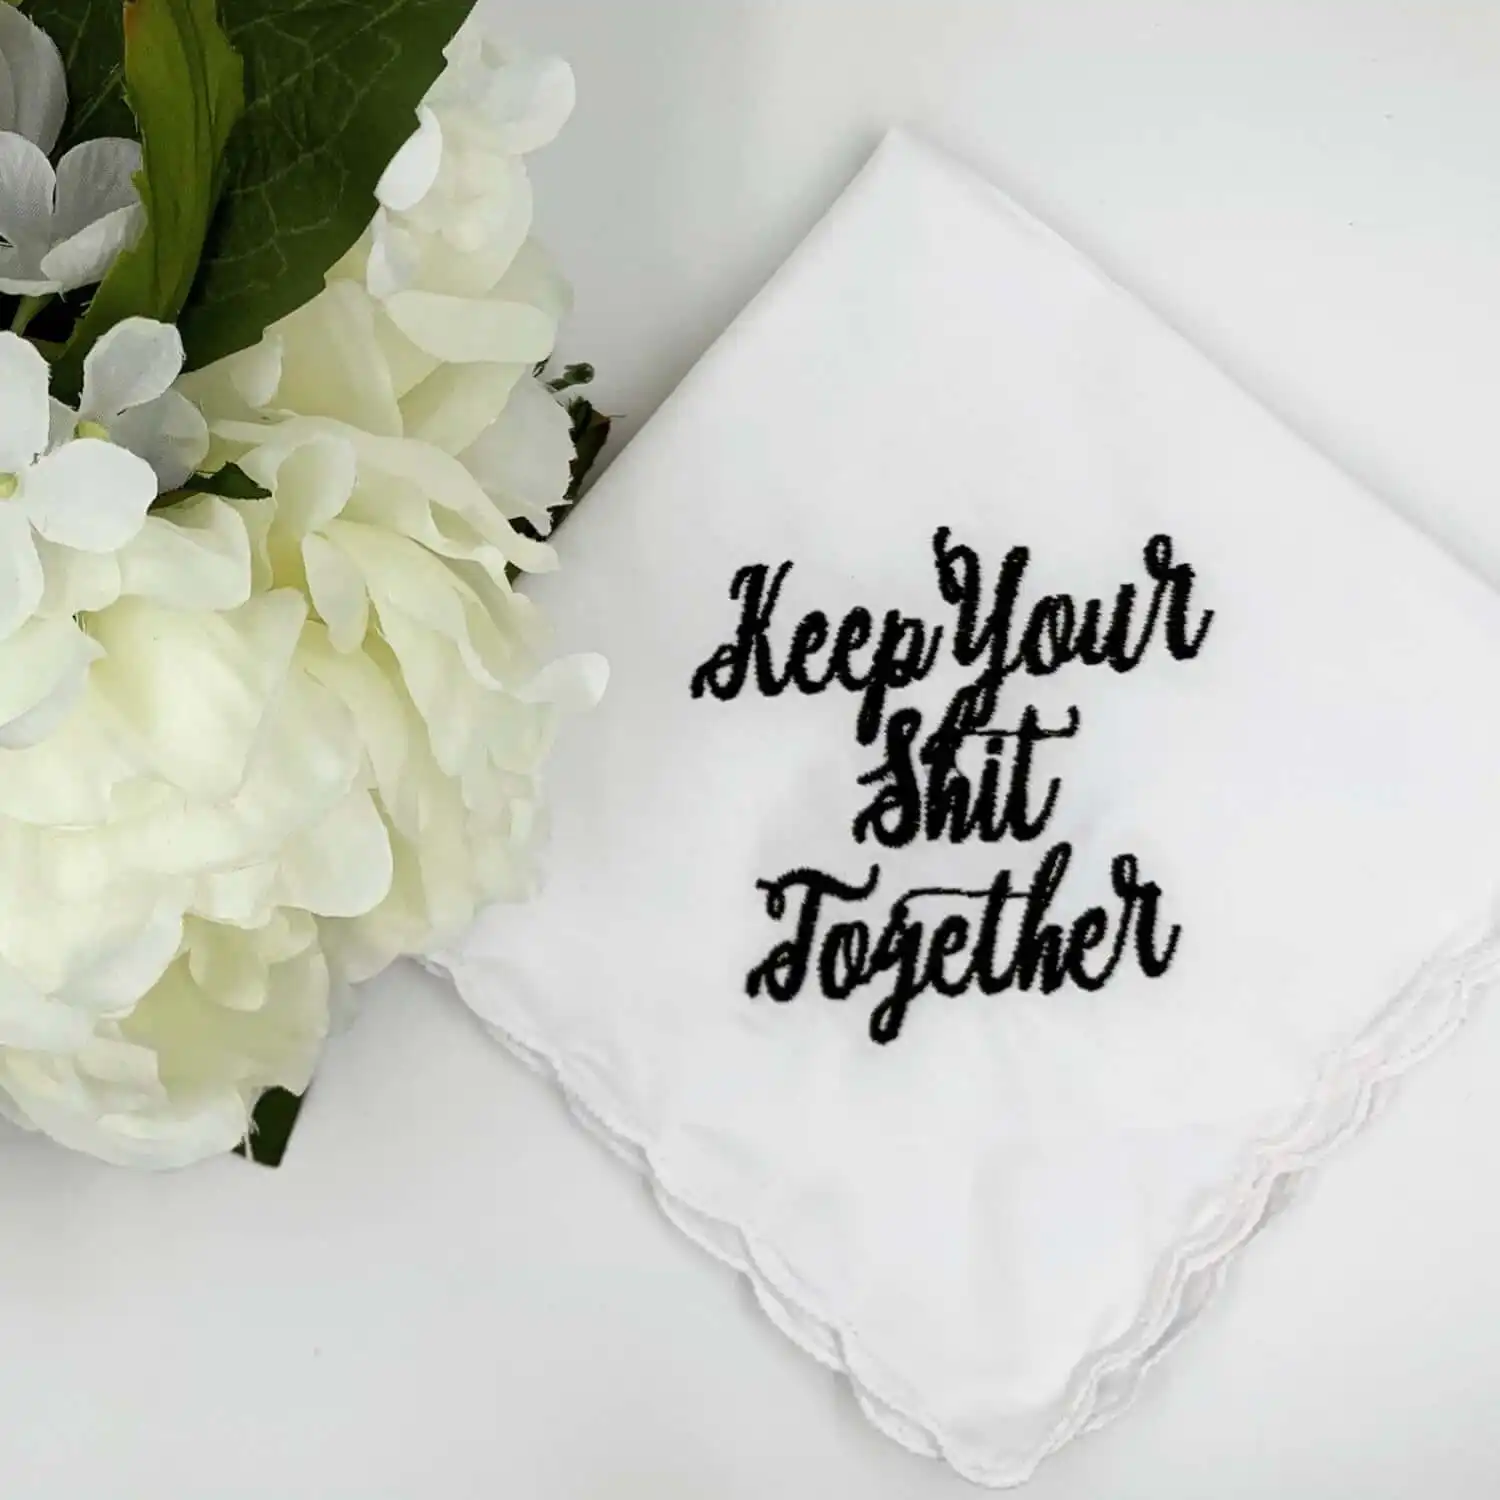 This Hilarious "Keep Your Sh*t Together" Handkerchief